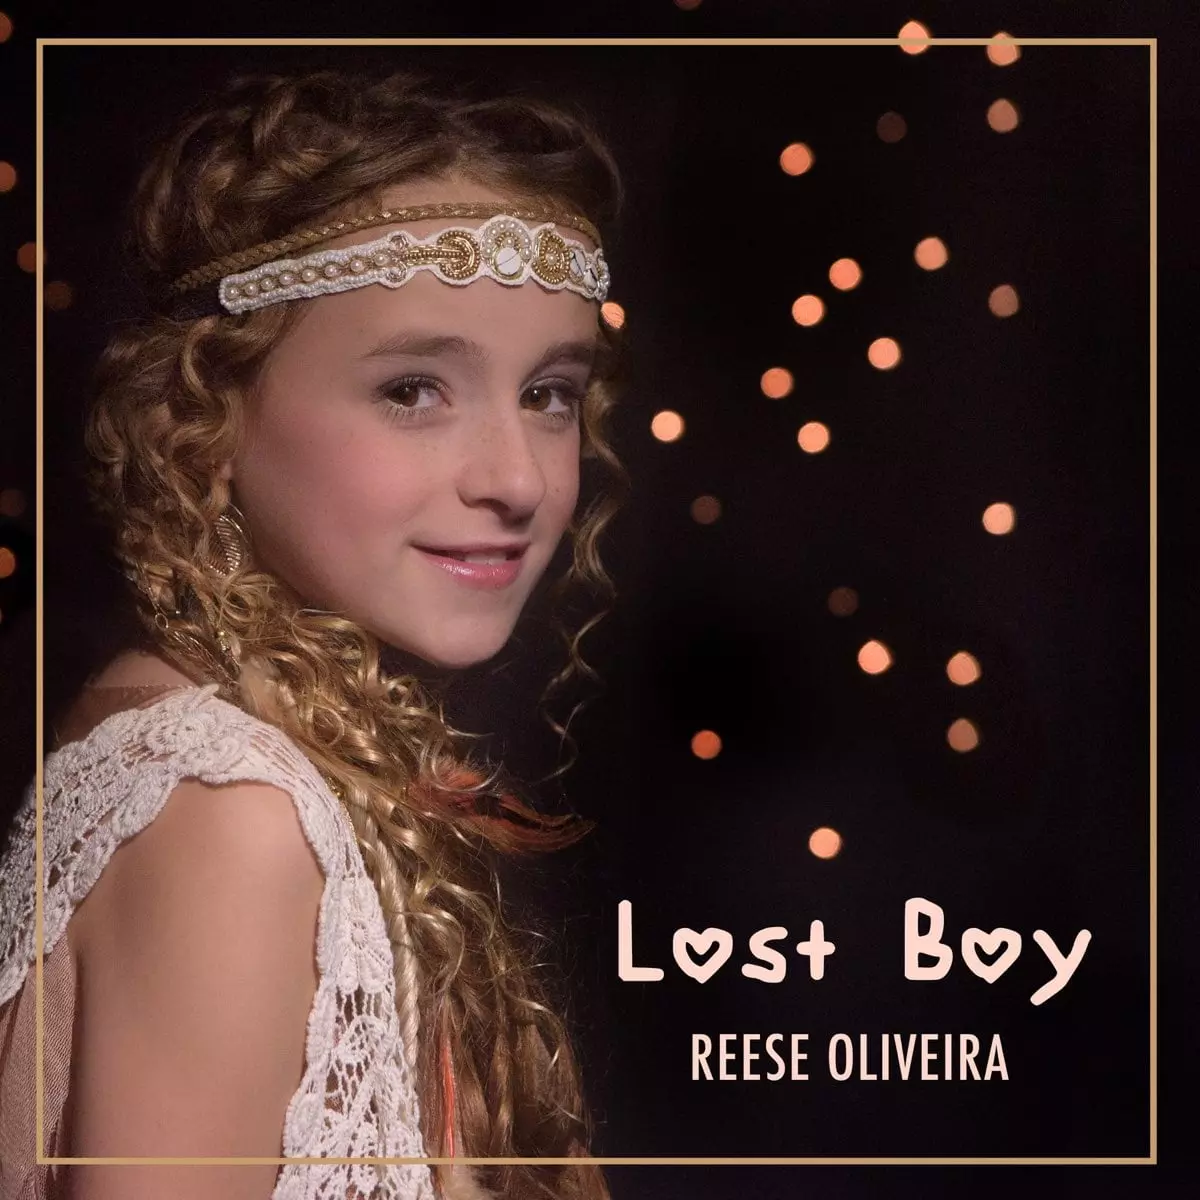 ‎Lost Boy - Single by Reese Oliveira on Apple Music